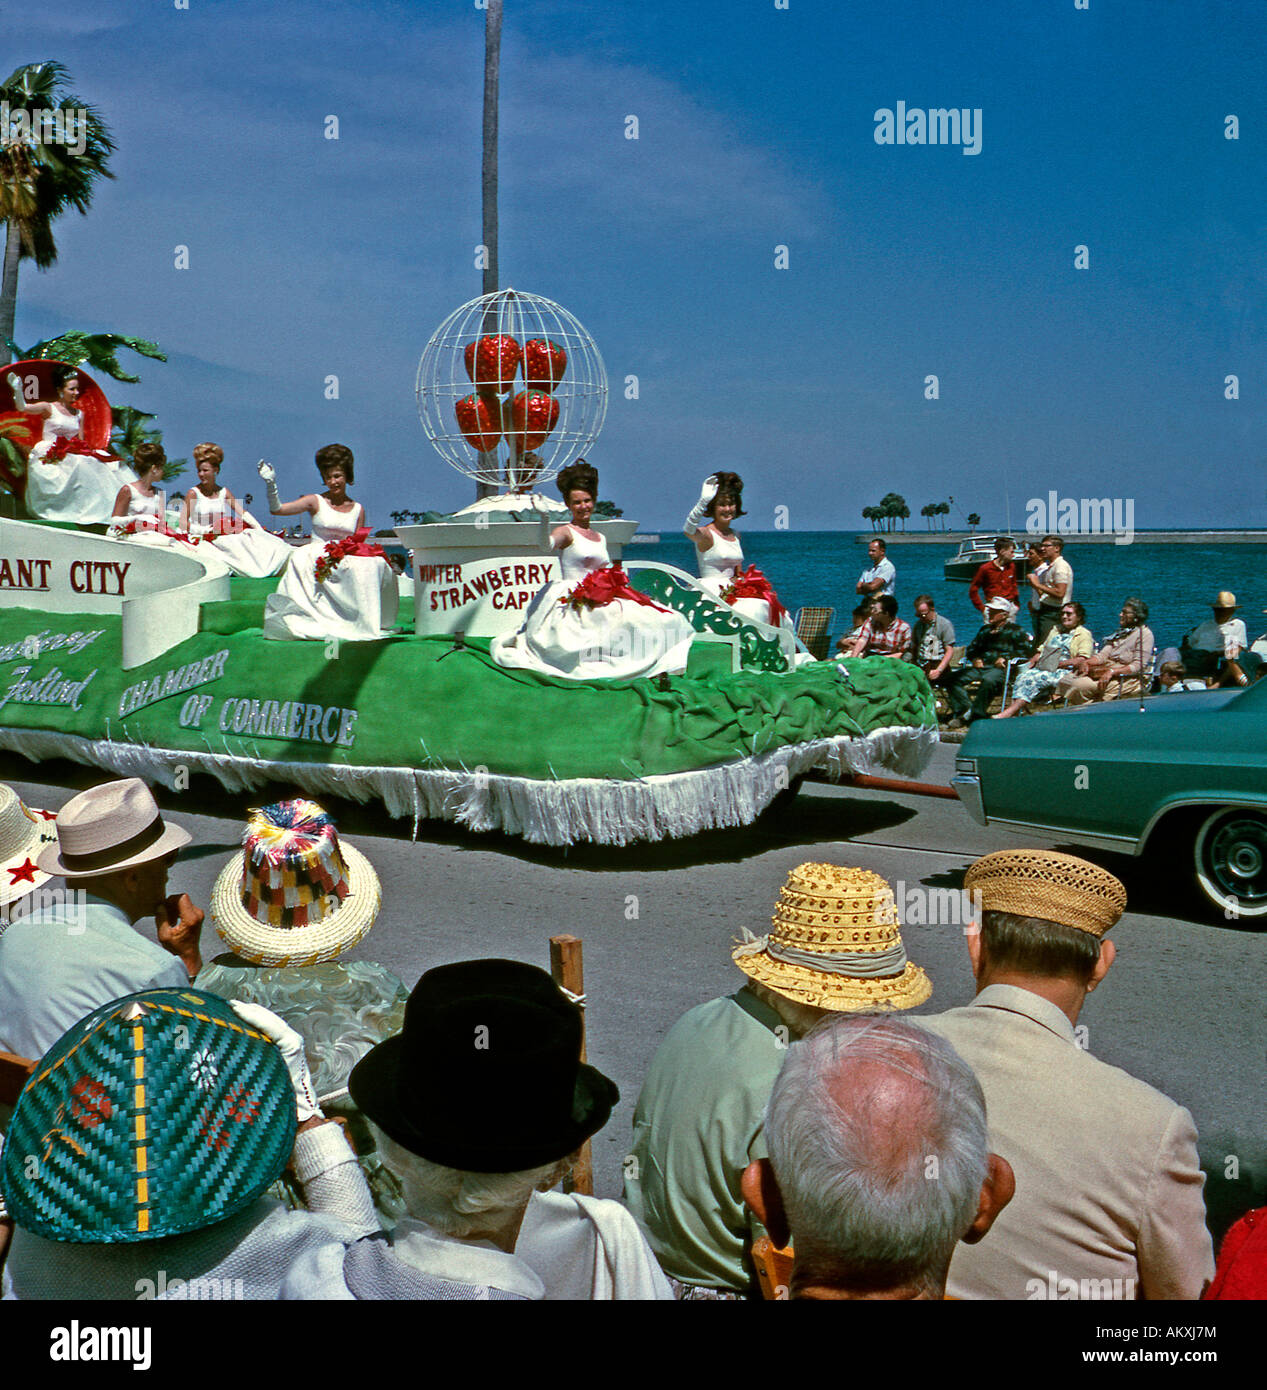 Parade float for Plant City strawberries at the Festival of States St Petersburg Florida USA 1966 Stock Photo